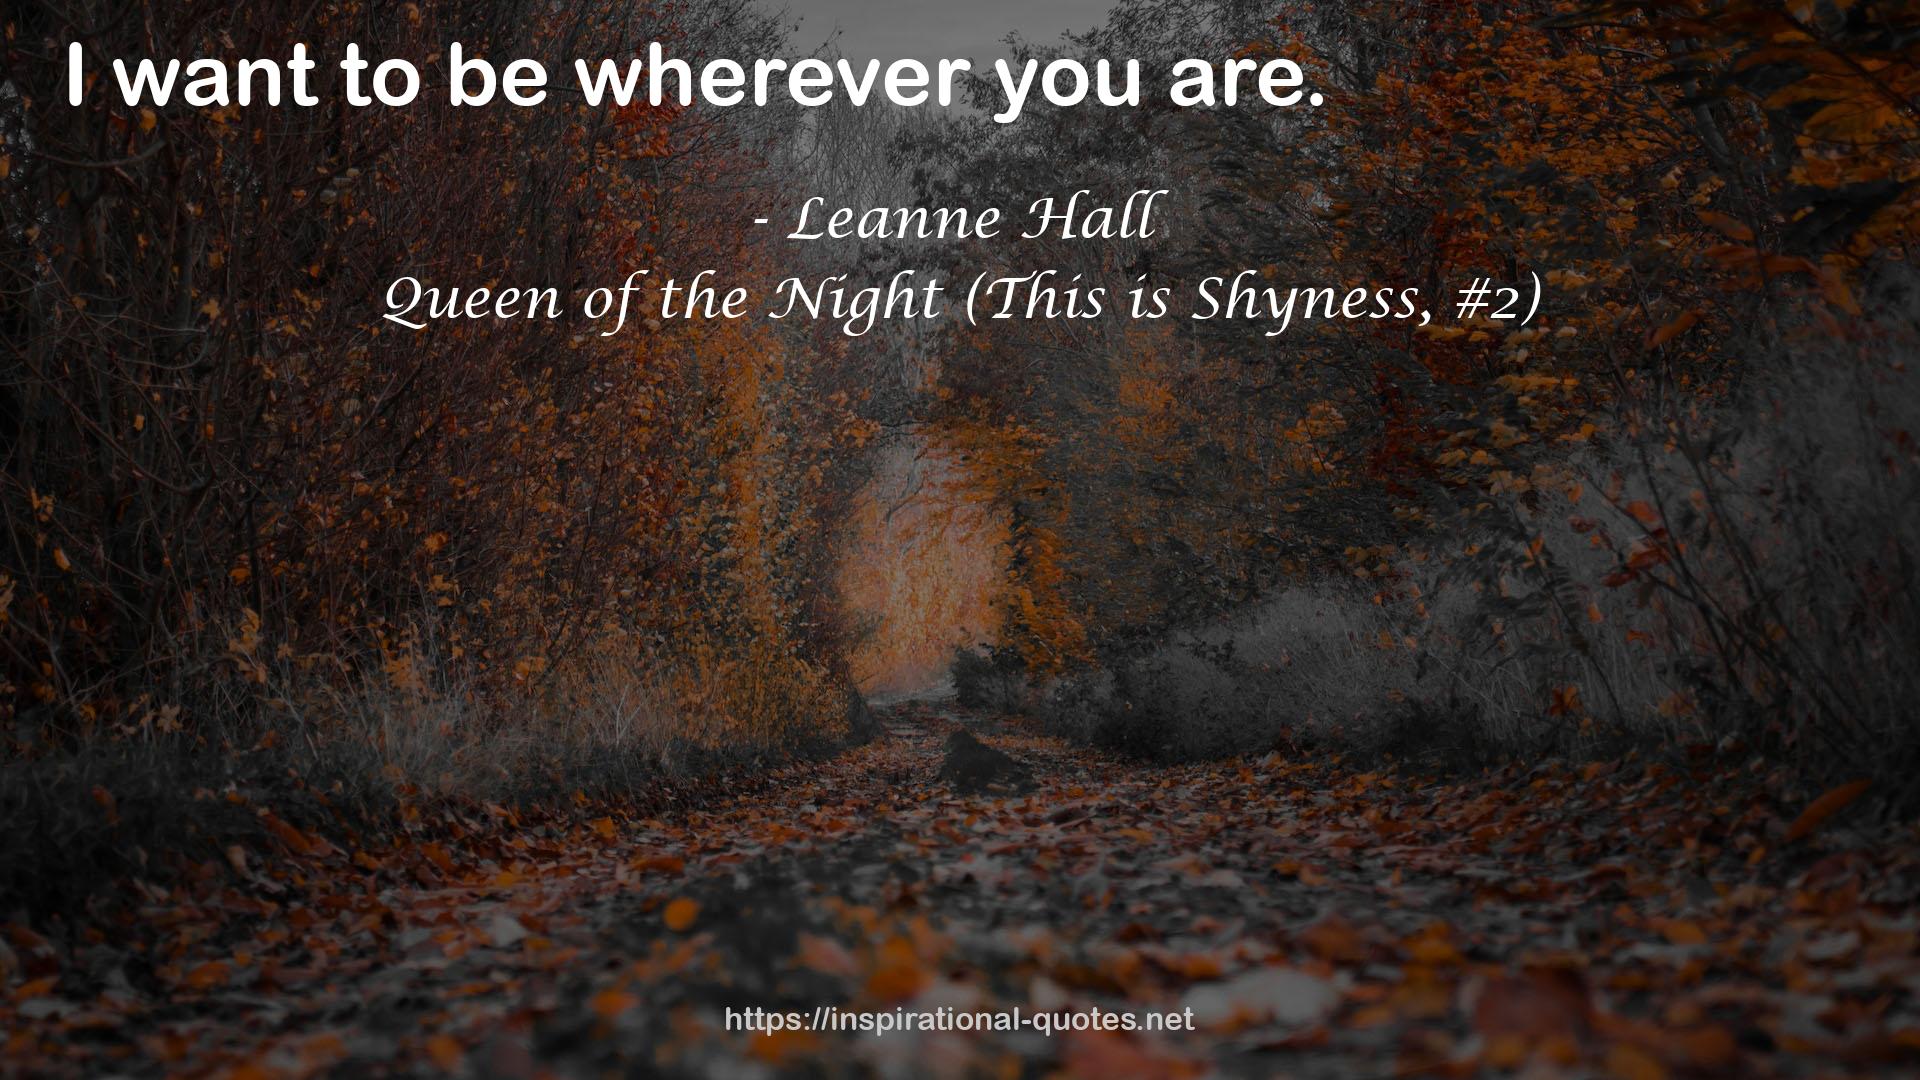 Queen of the Night (This is Shyness, #2) QUOTES